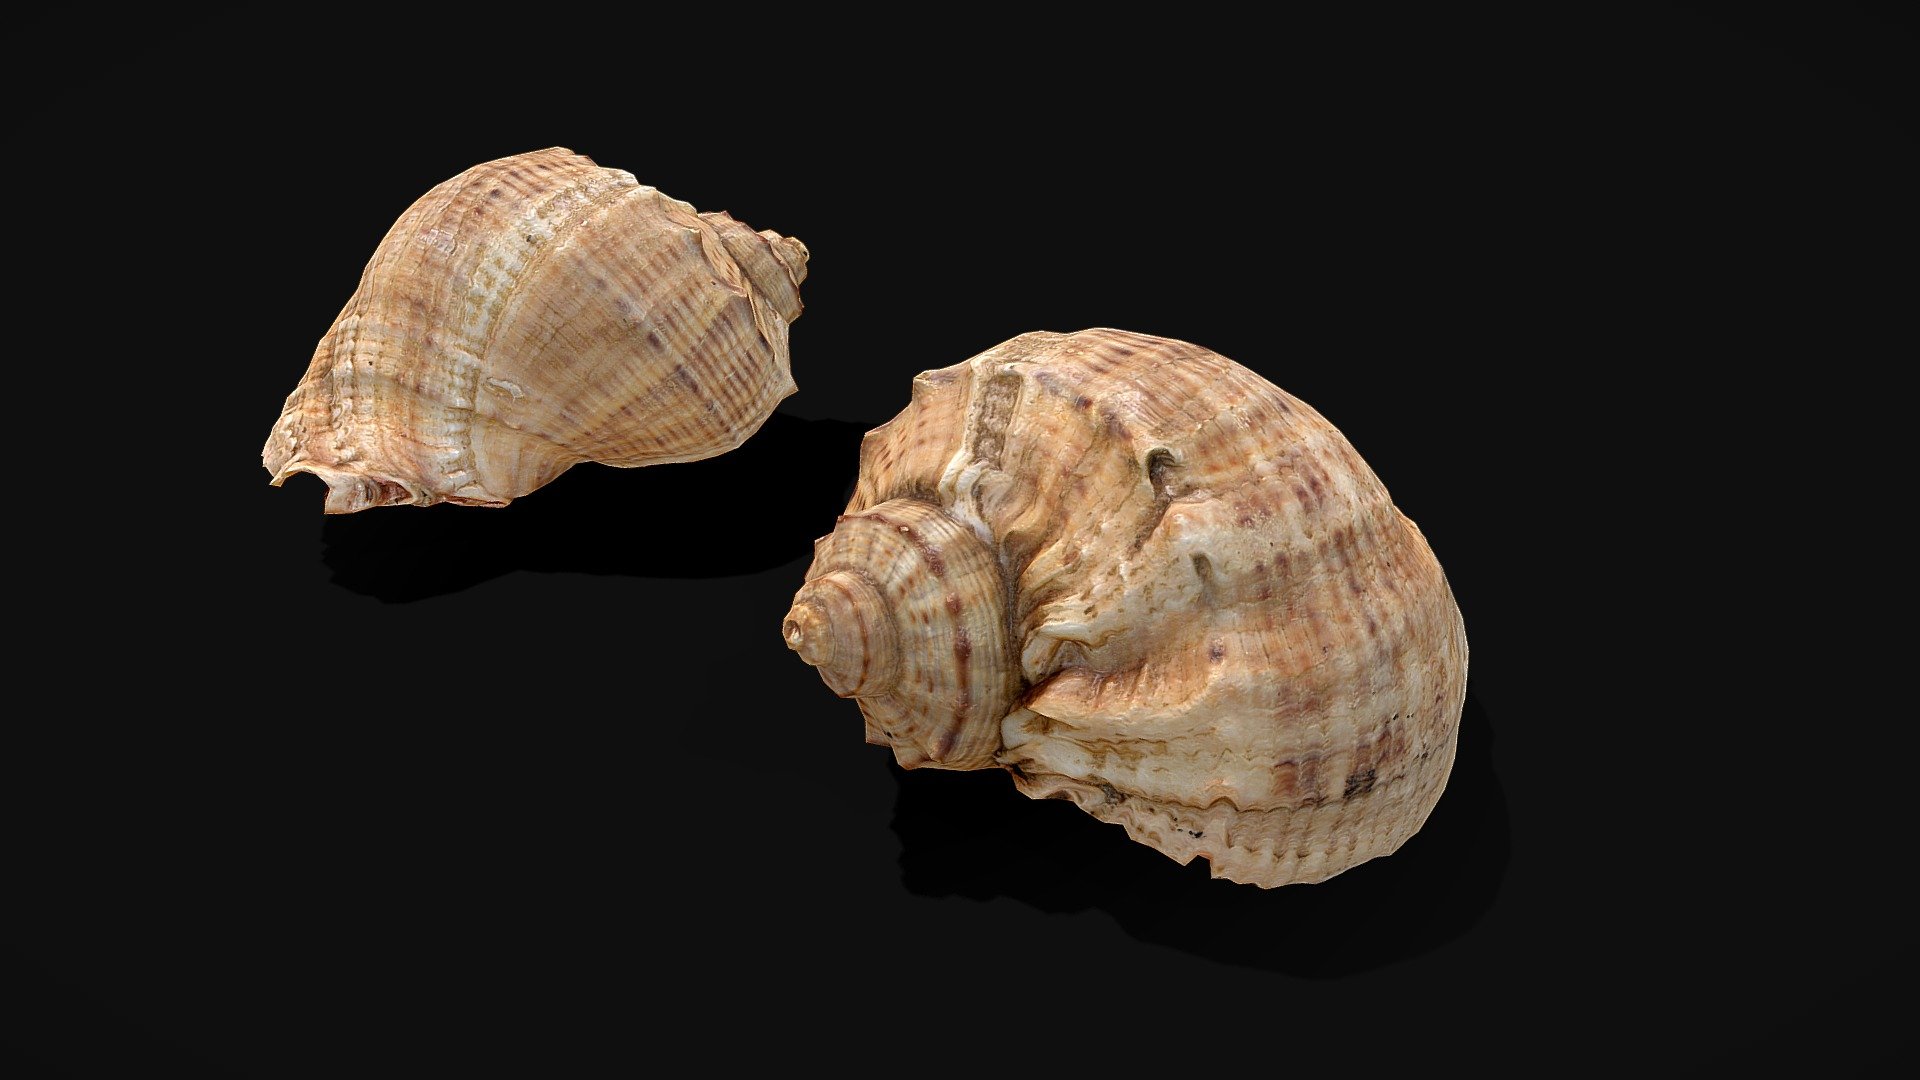 Photoscaned Seashell  - Photoscaned low poly model. The model is ready for your game. Can be used as an environment element 3d model